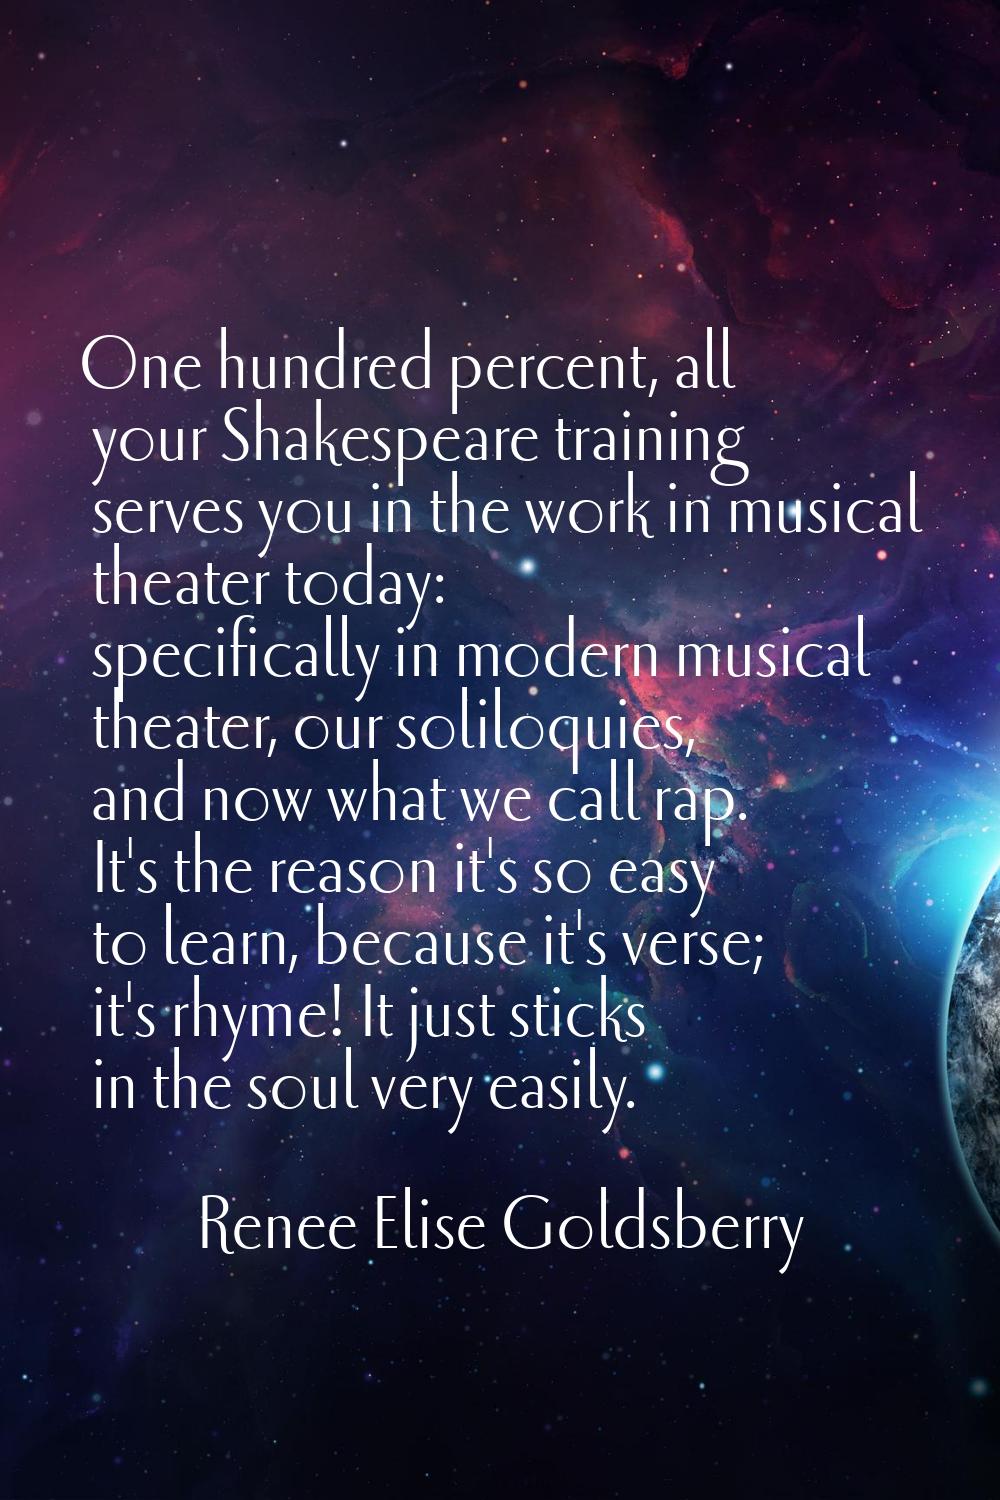 One hundred percent, all your Shakespeare training serves you in the work in musical theater today: